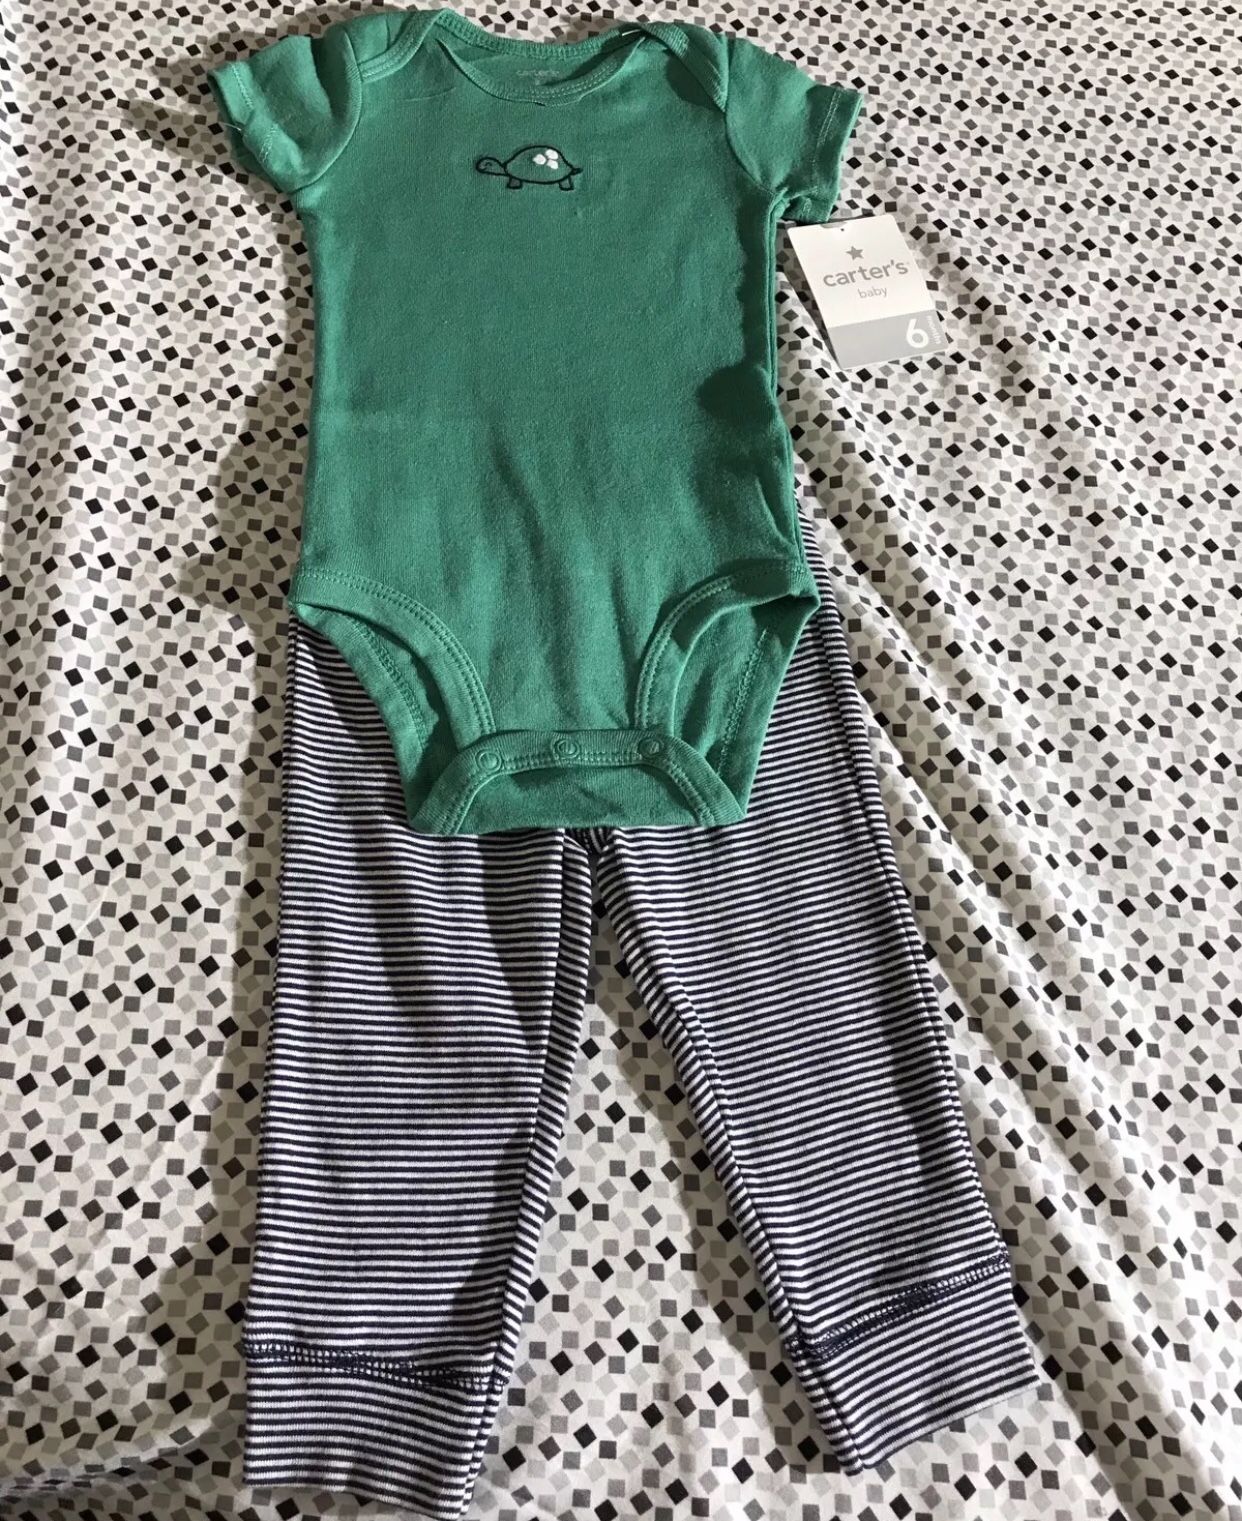 Carter’s Baby Boy Outfit 6M